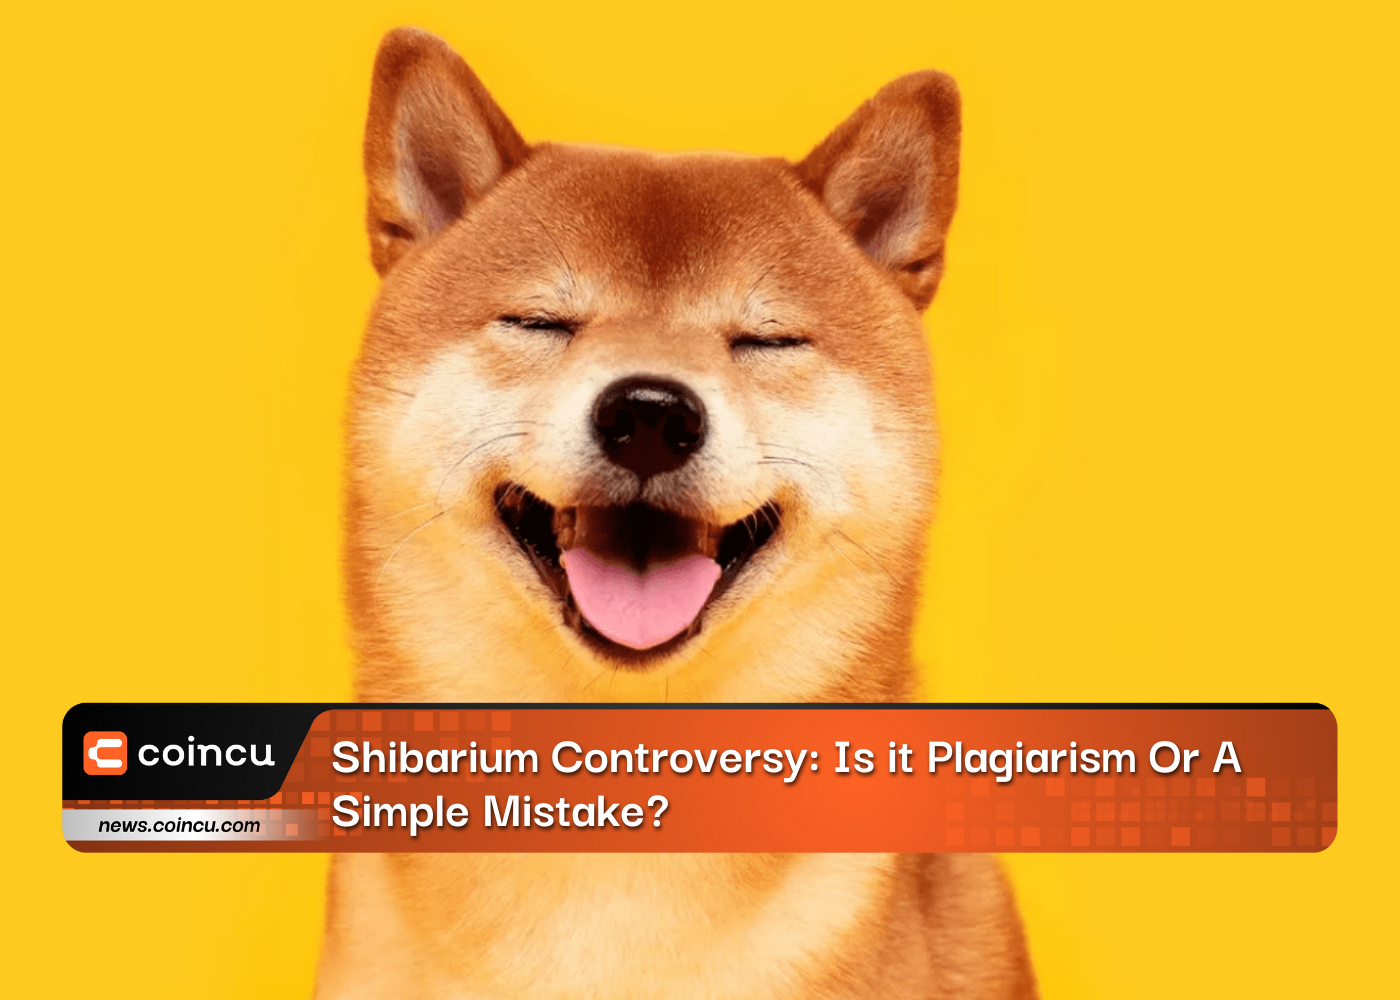 Shibarium Controversy: Is it Plagiarism Or A Simple Mistake?